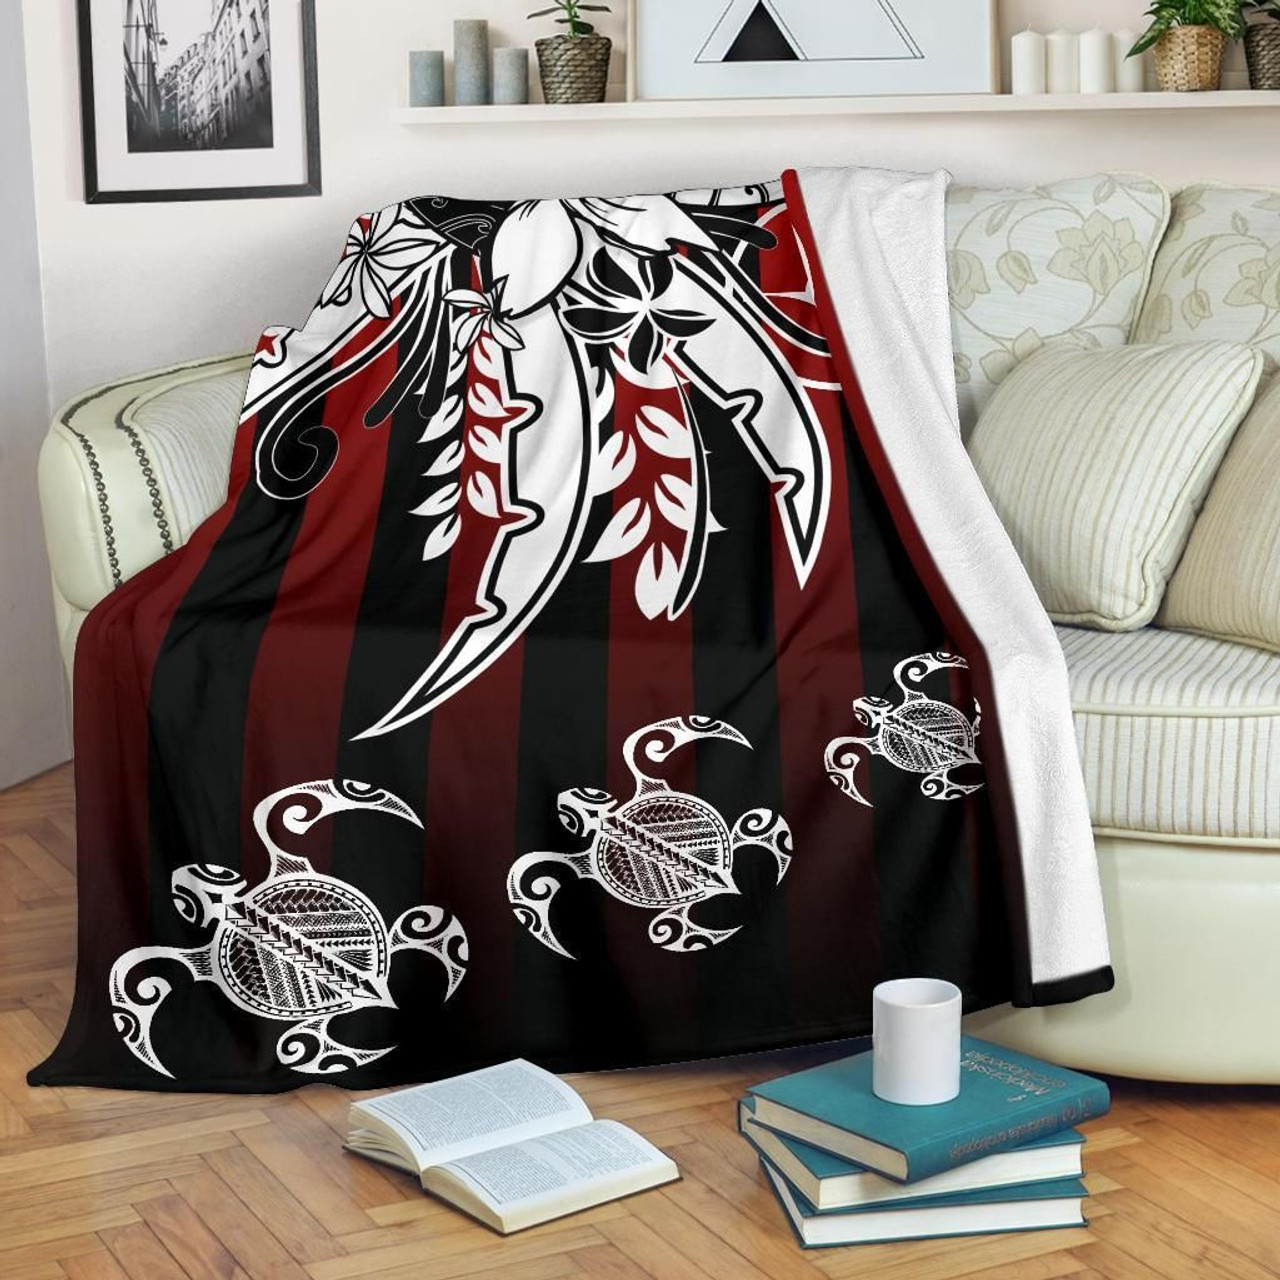 Yap State Premium Blanket - Vertical Stripes Style 2